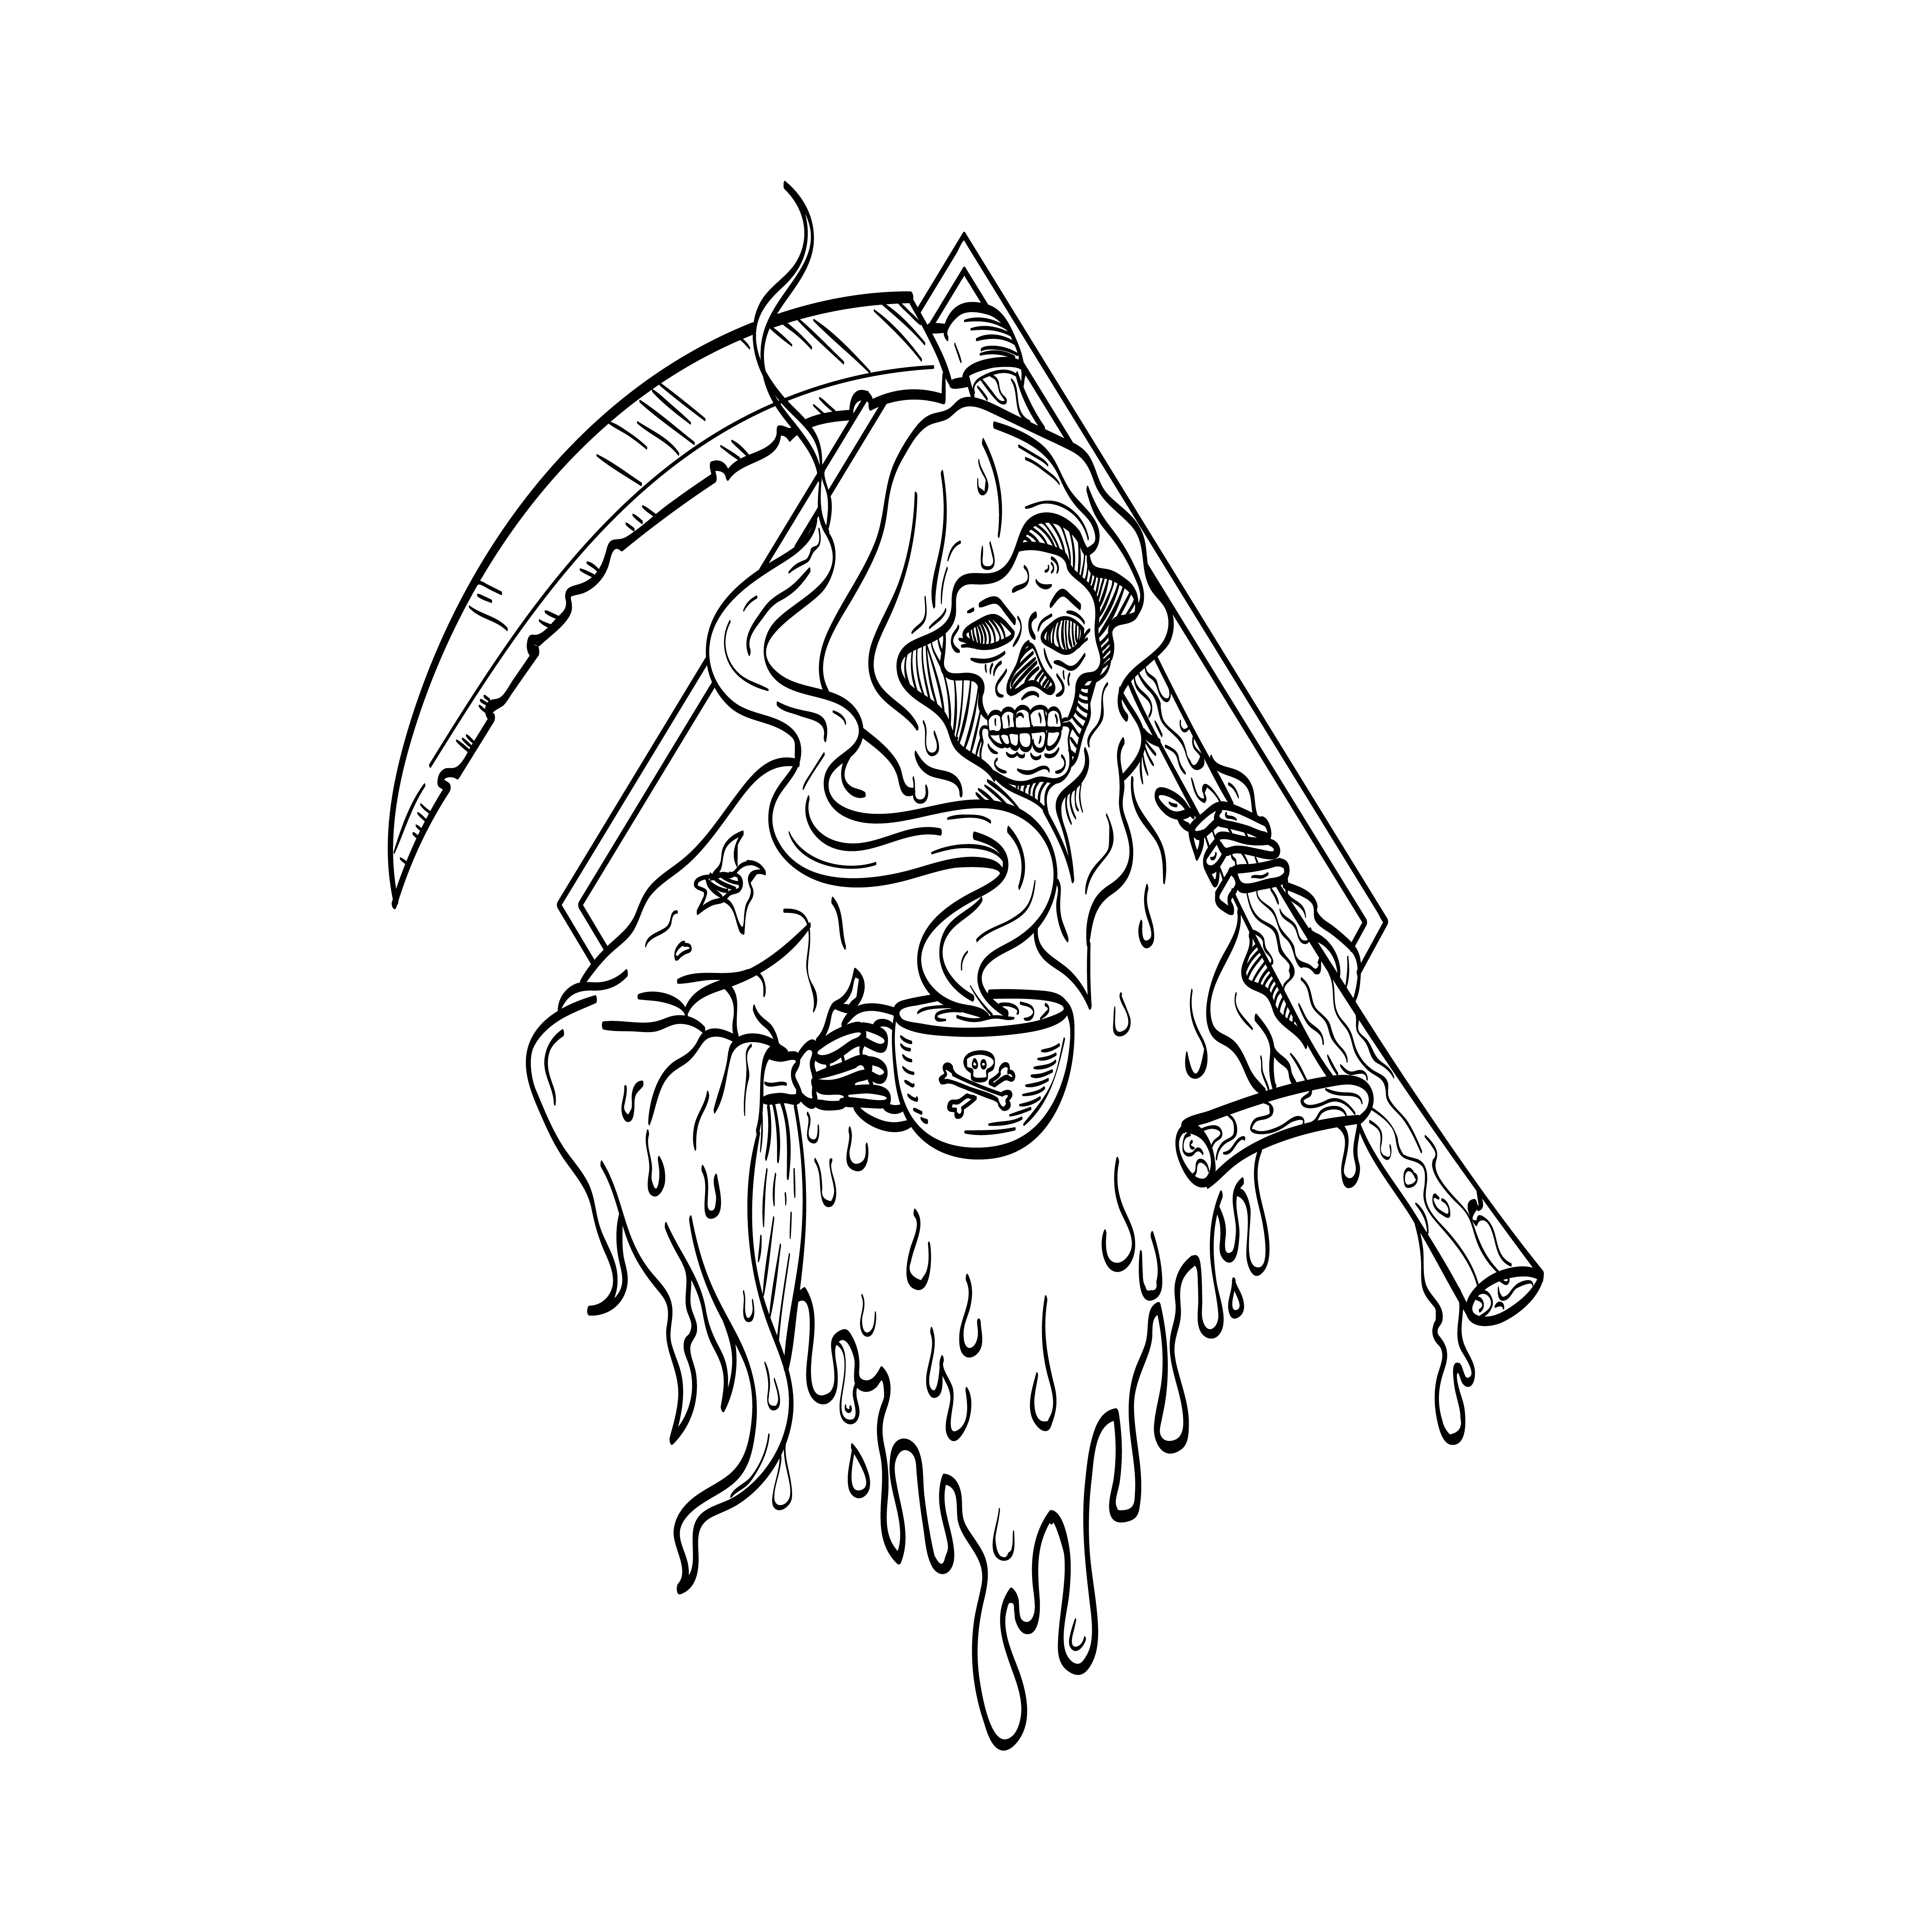 Sketch Cartoon Dreadful Grim Reaper In Old Hooded Cloak With Scythe  Pointing At Viewer Death Or Skeleton Monster Character For Tshirt Print  Or Tattoo Design Usage Royalty Free SVG Cliparts Vectors And